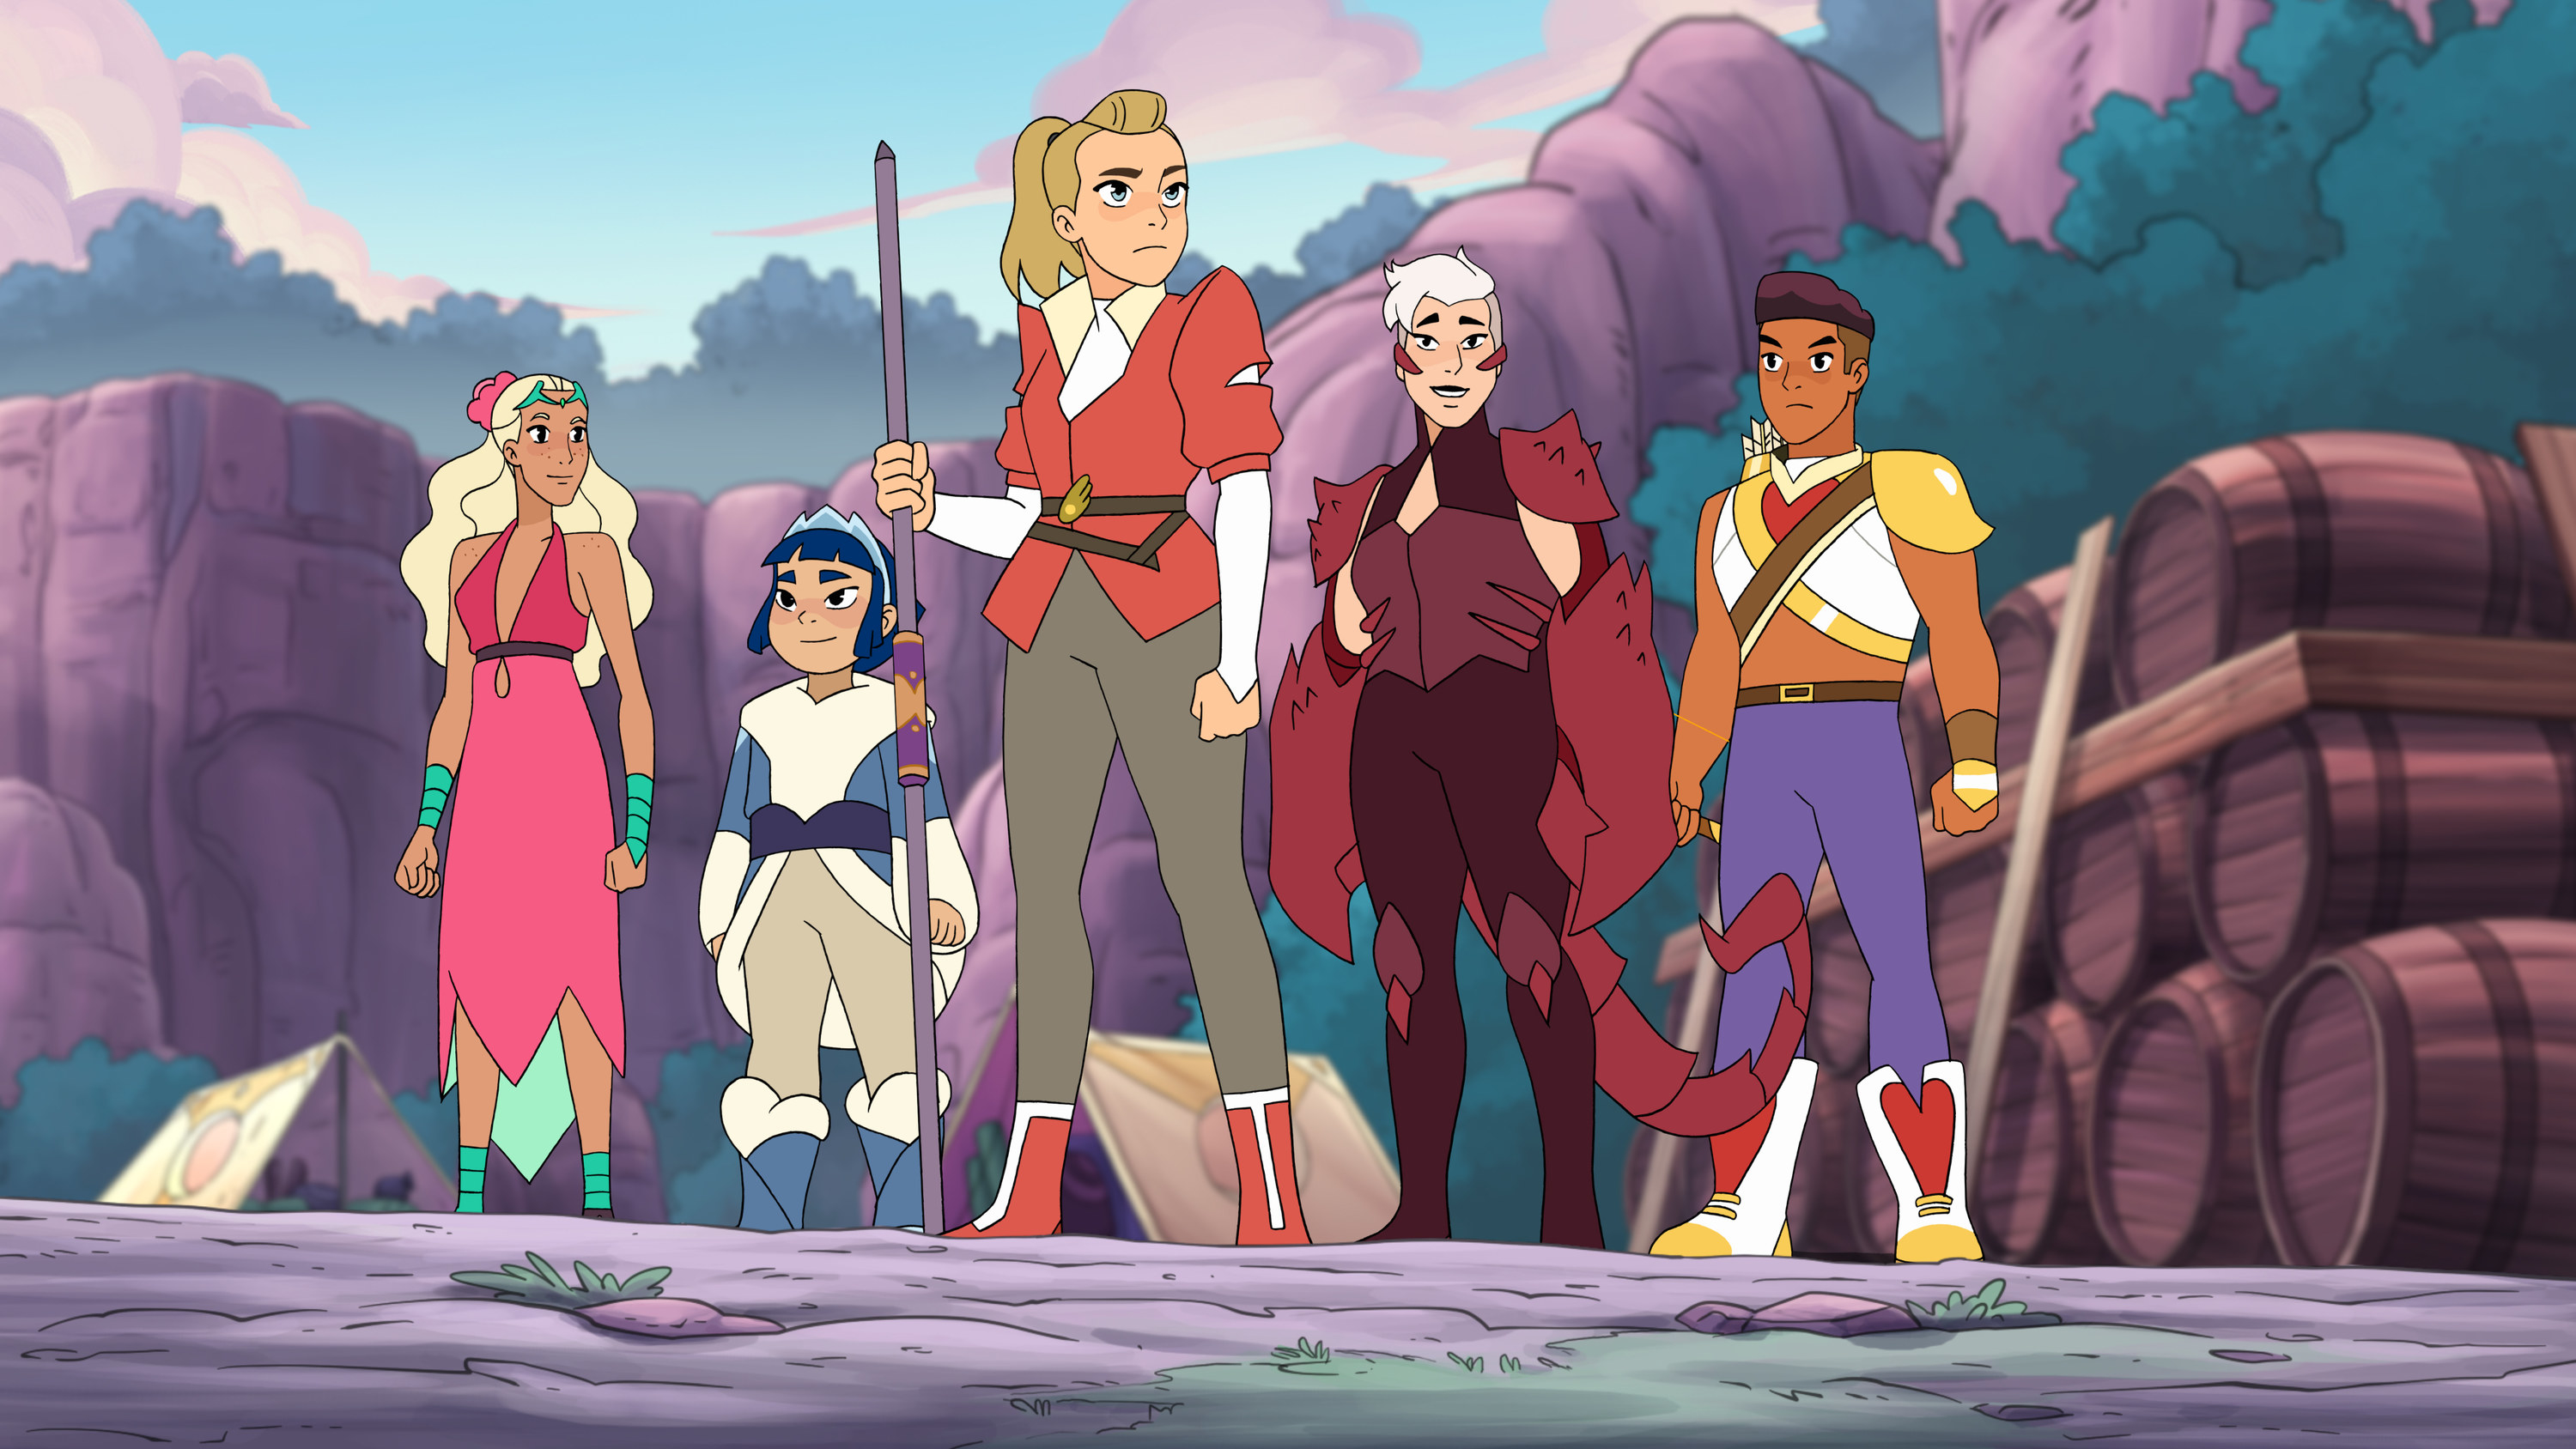 Adora, Bow, and the rest of the Princesses getting ready to fight